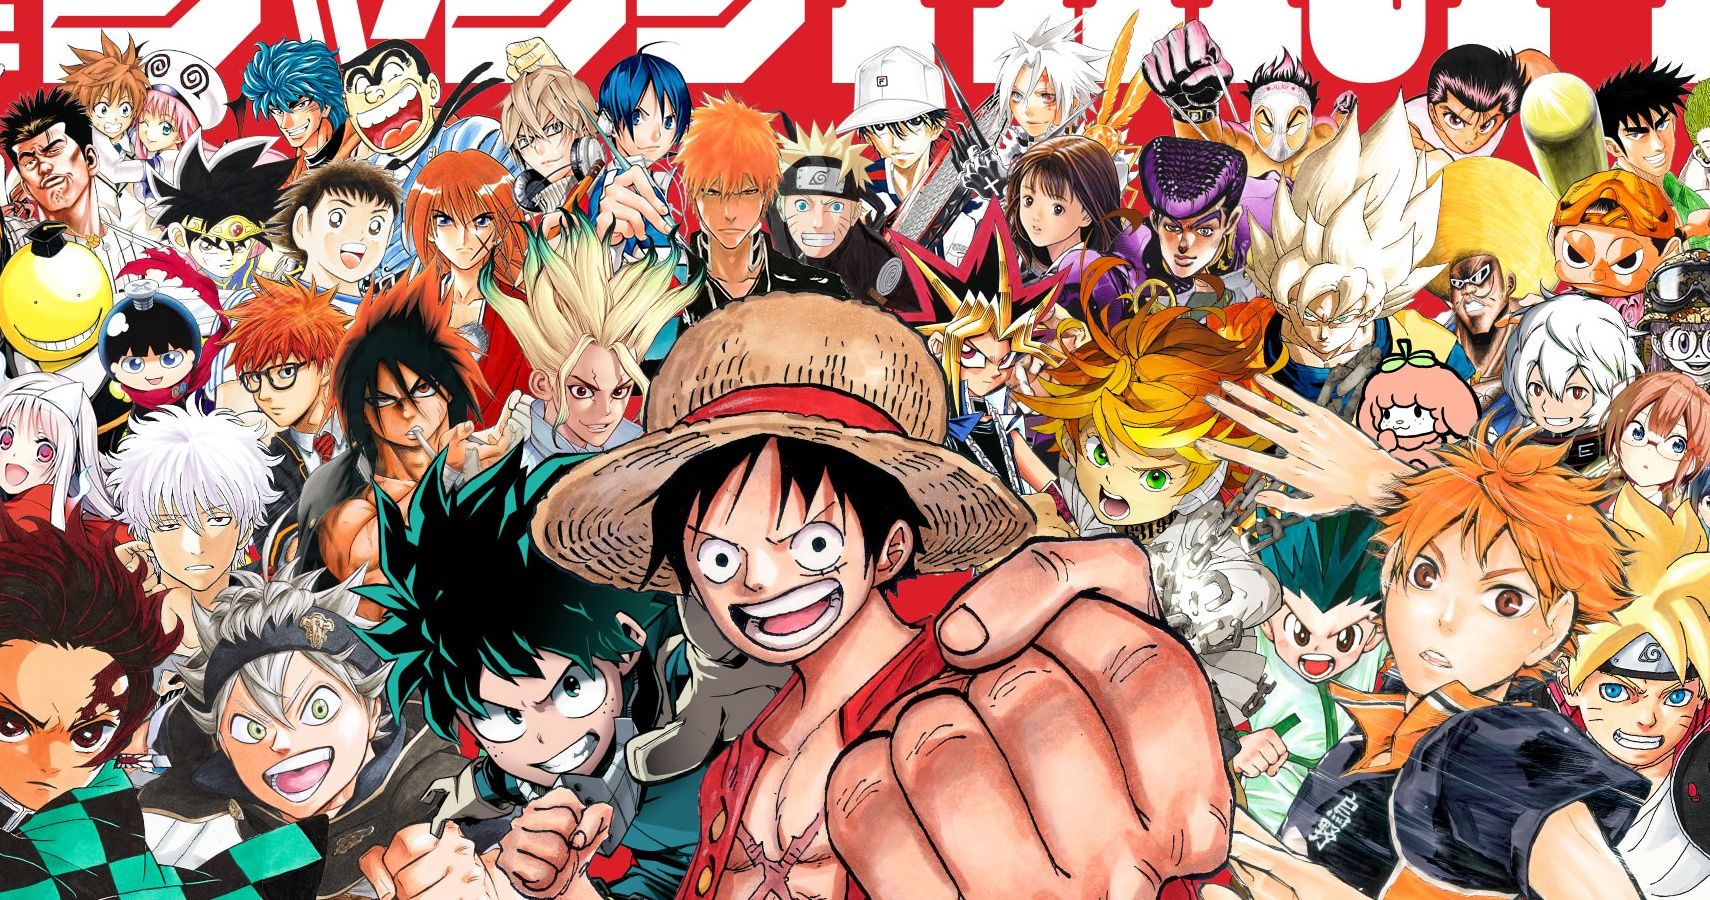 The 10 best shonen anime to watch with your nakamas | ONE Esports